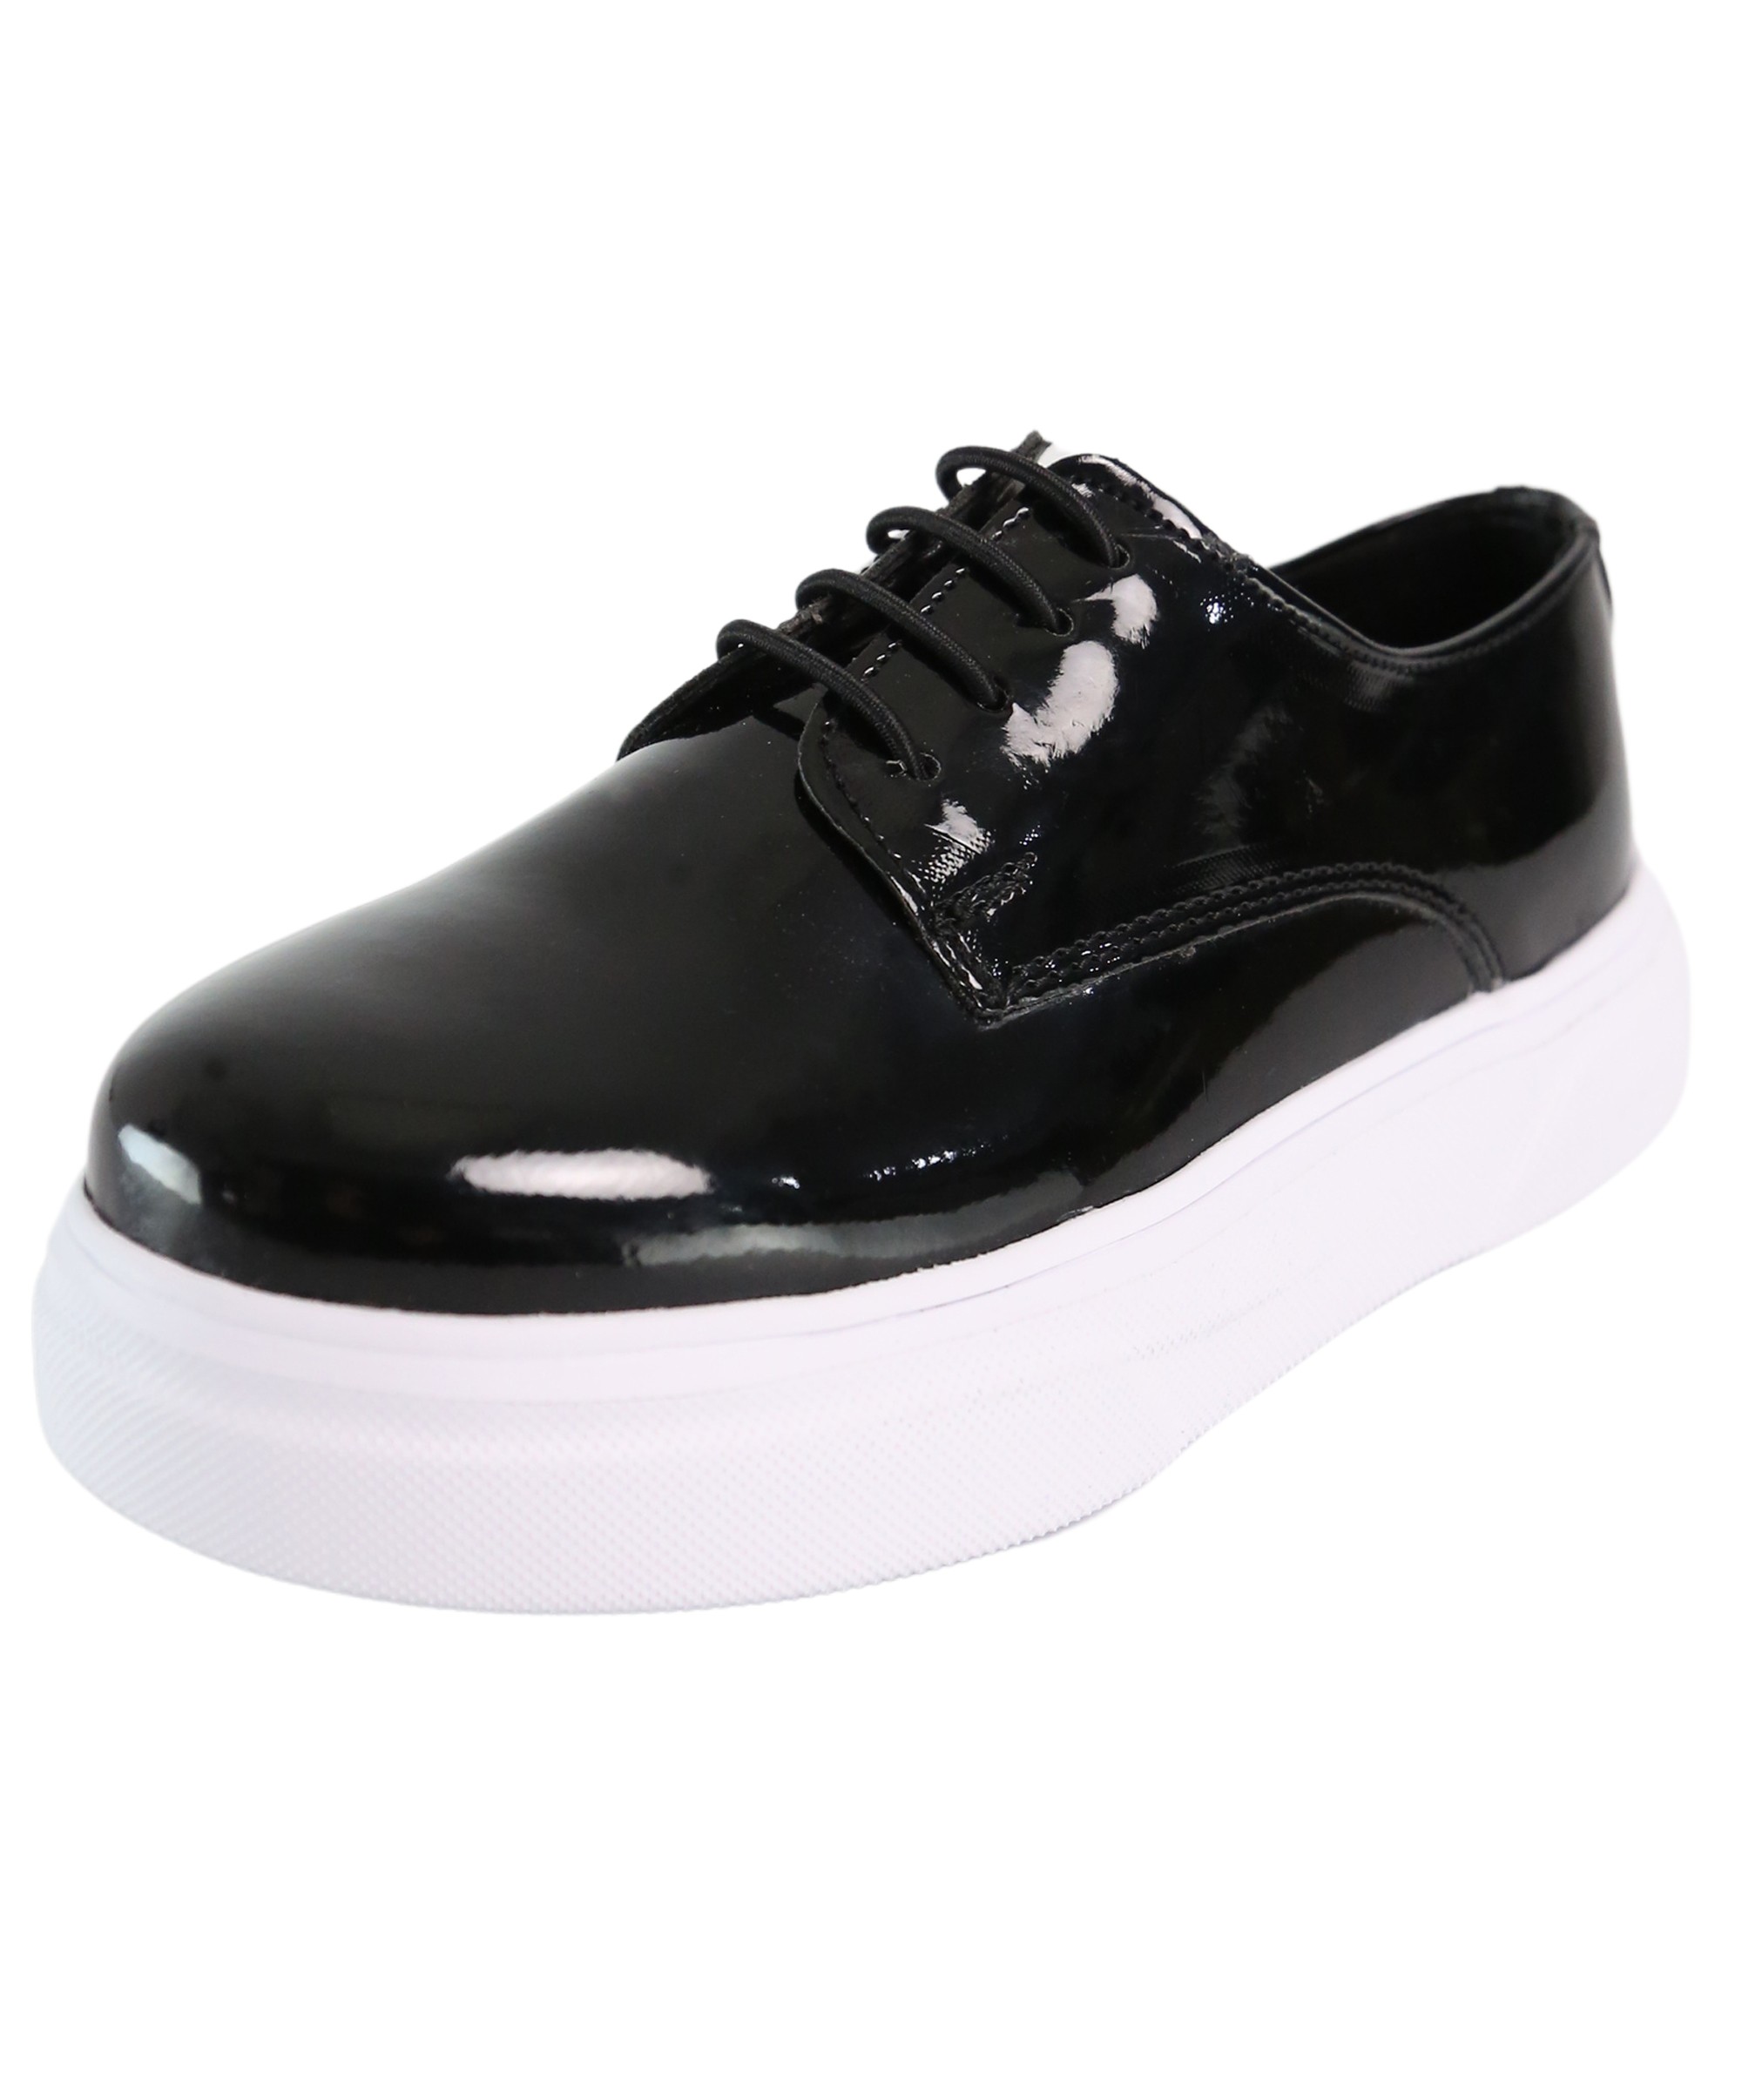 Boys Patent Black Lace-up Sneaker with White Thick Sole - Black